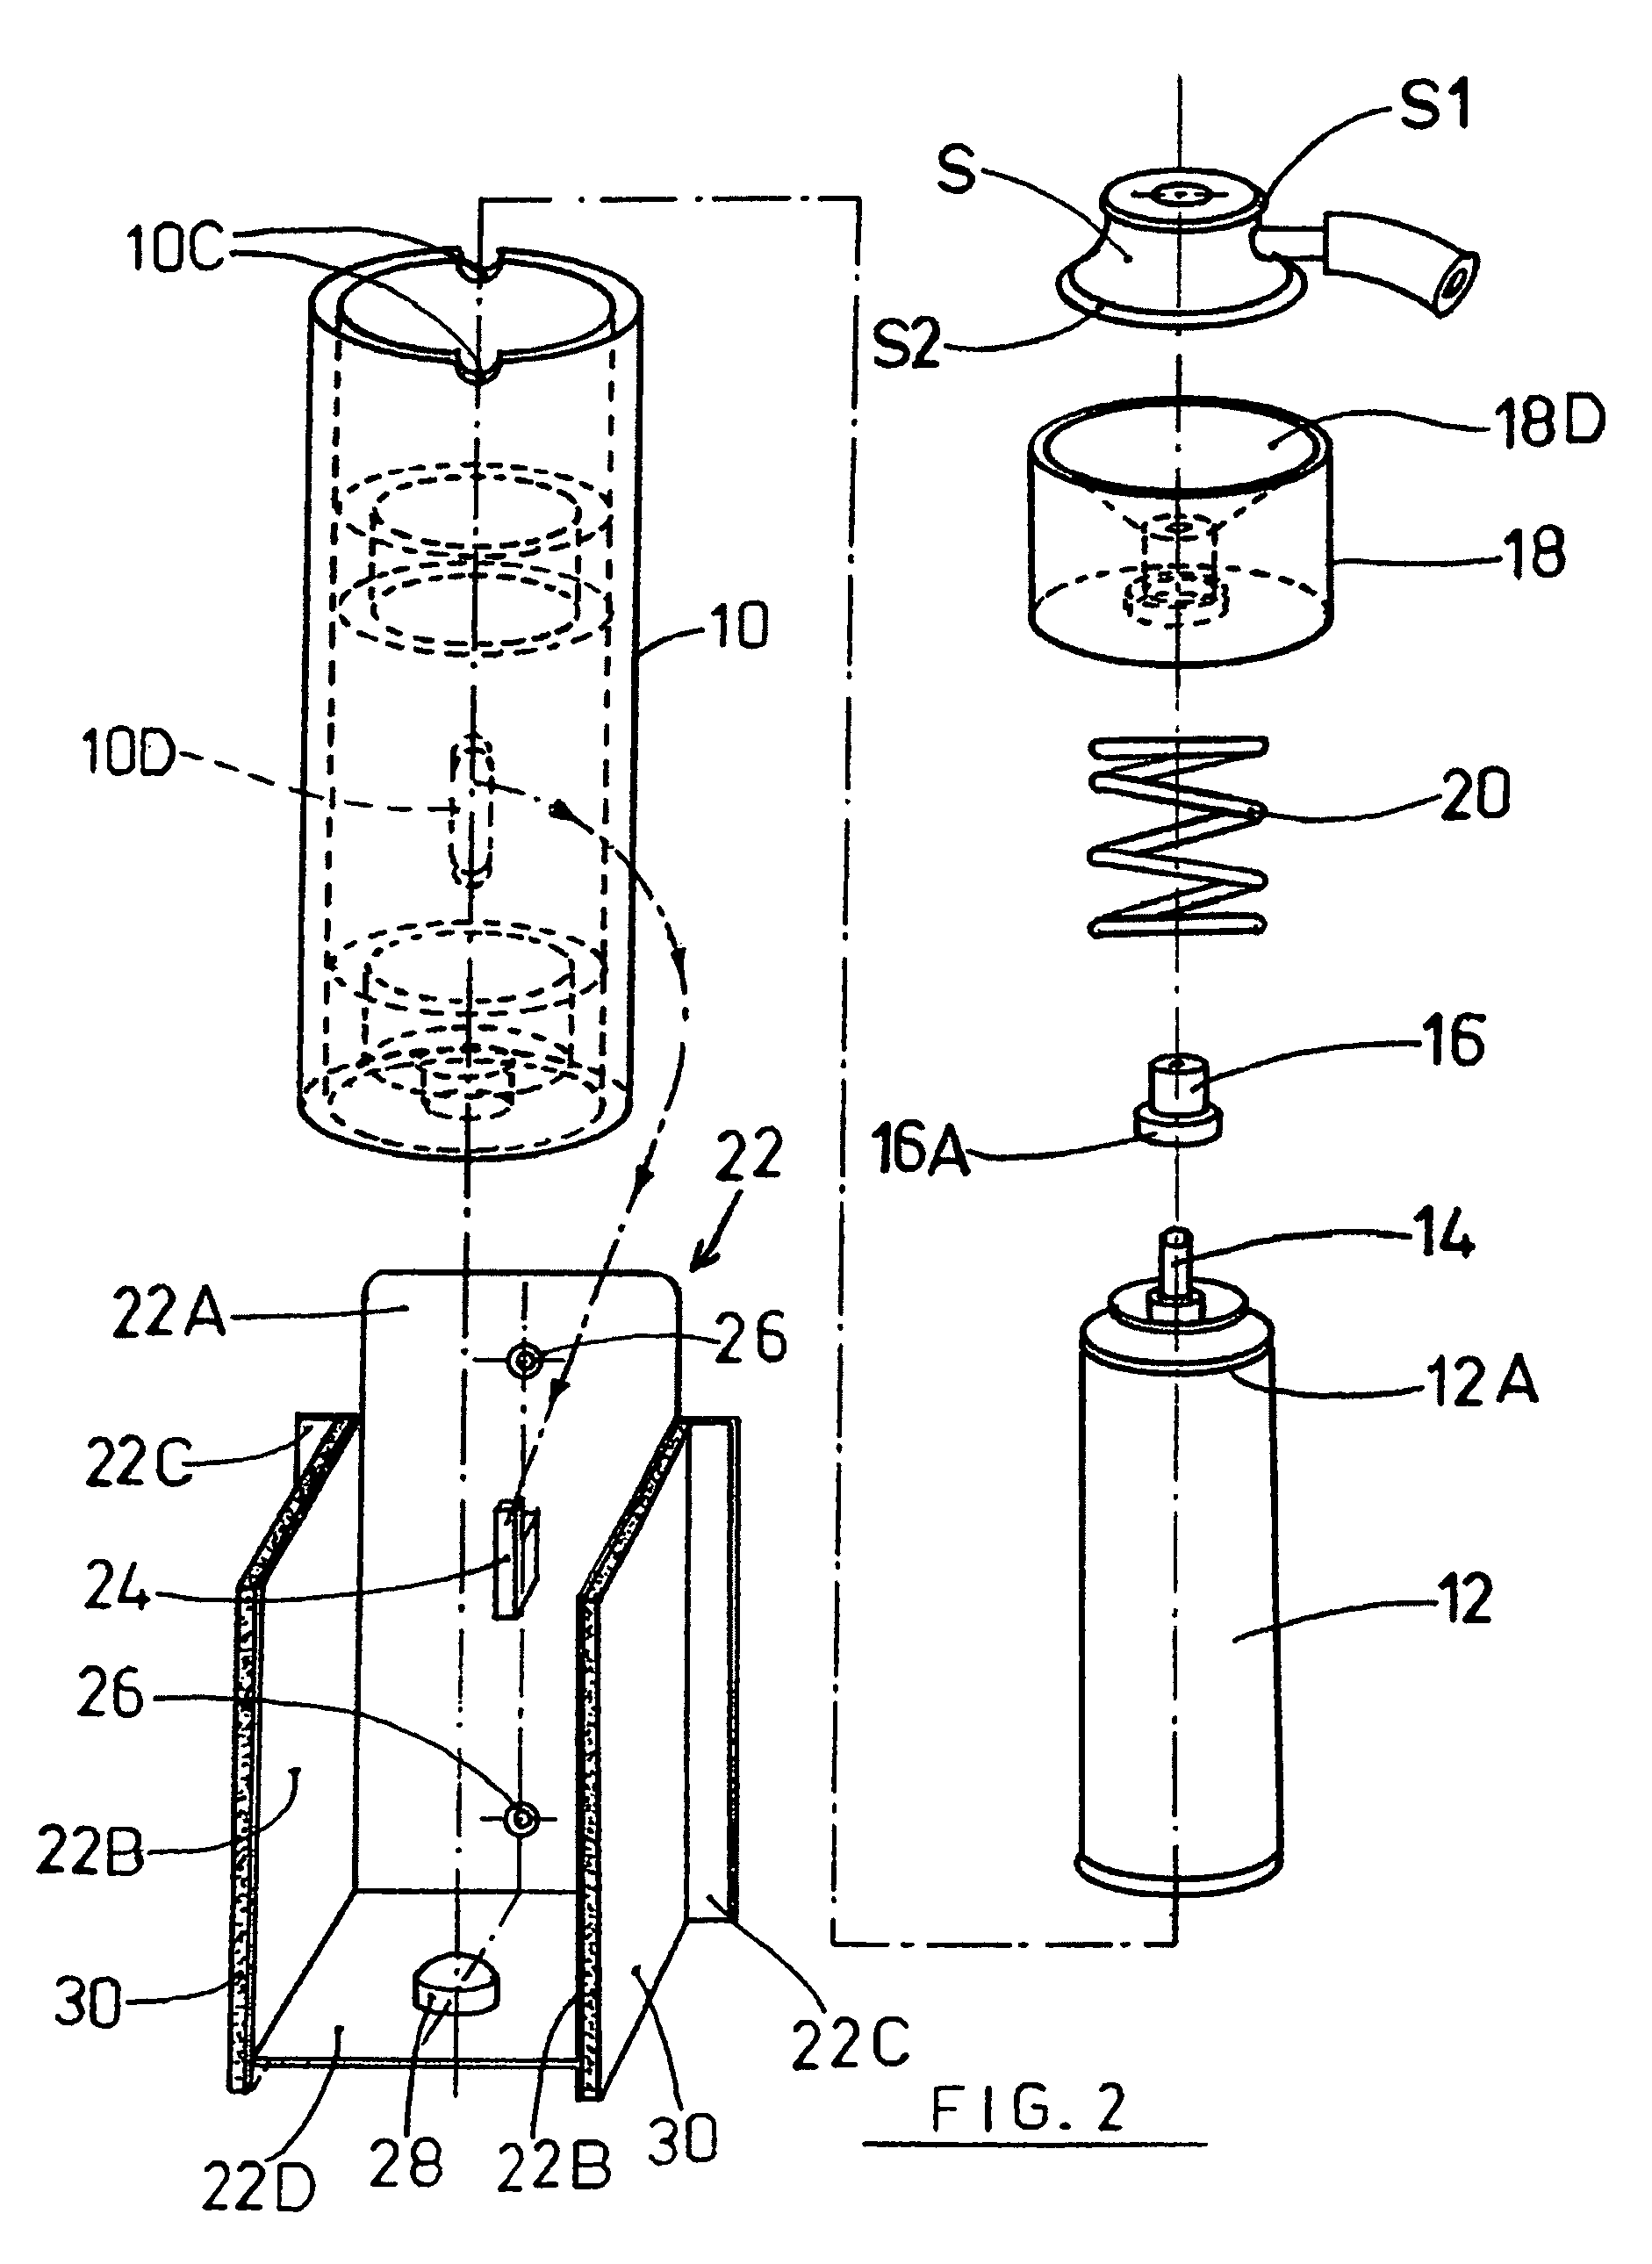 Device and method for disinfecting stethoscope heads